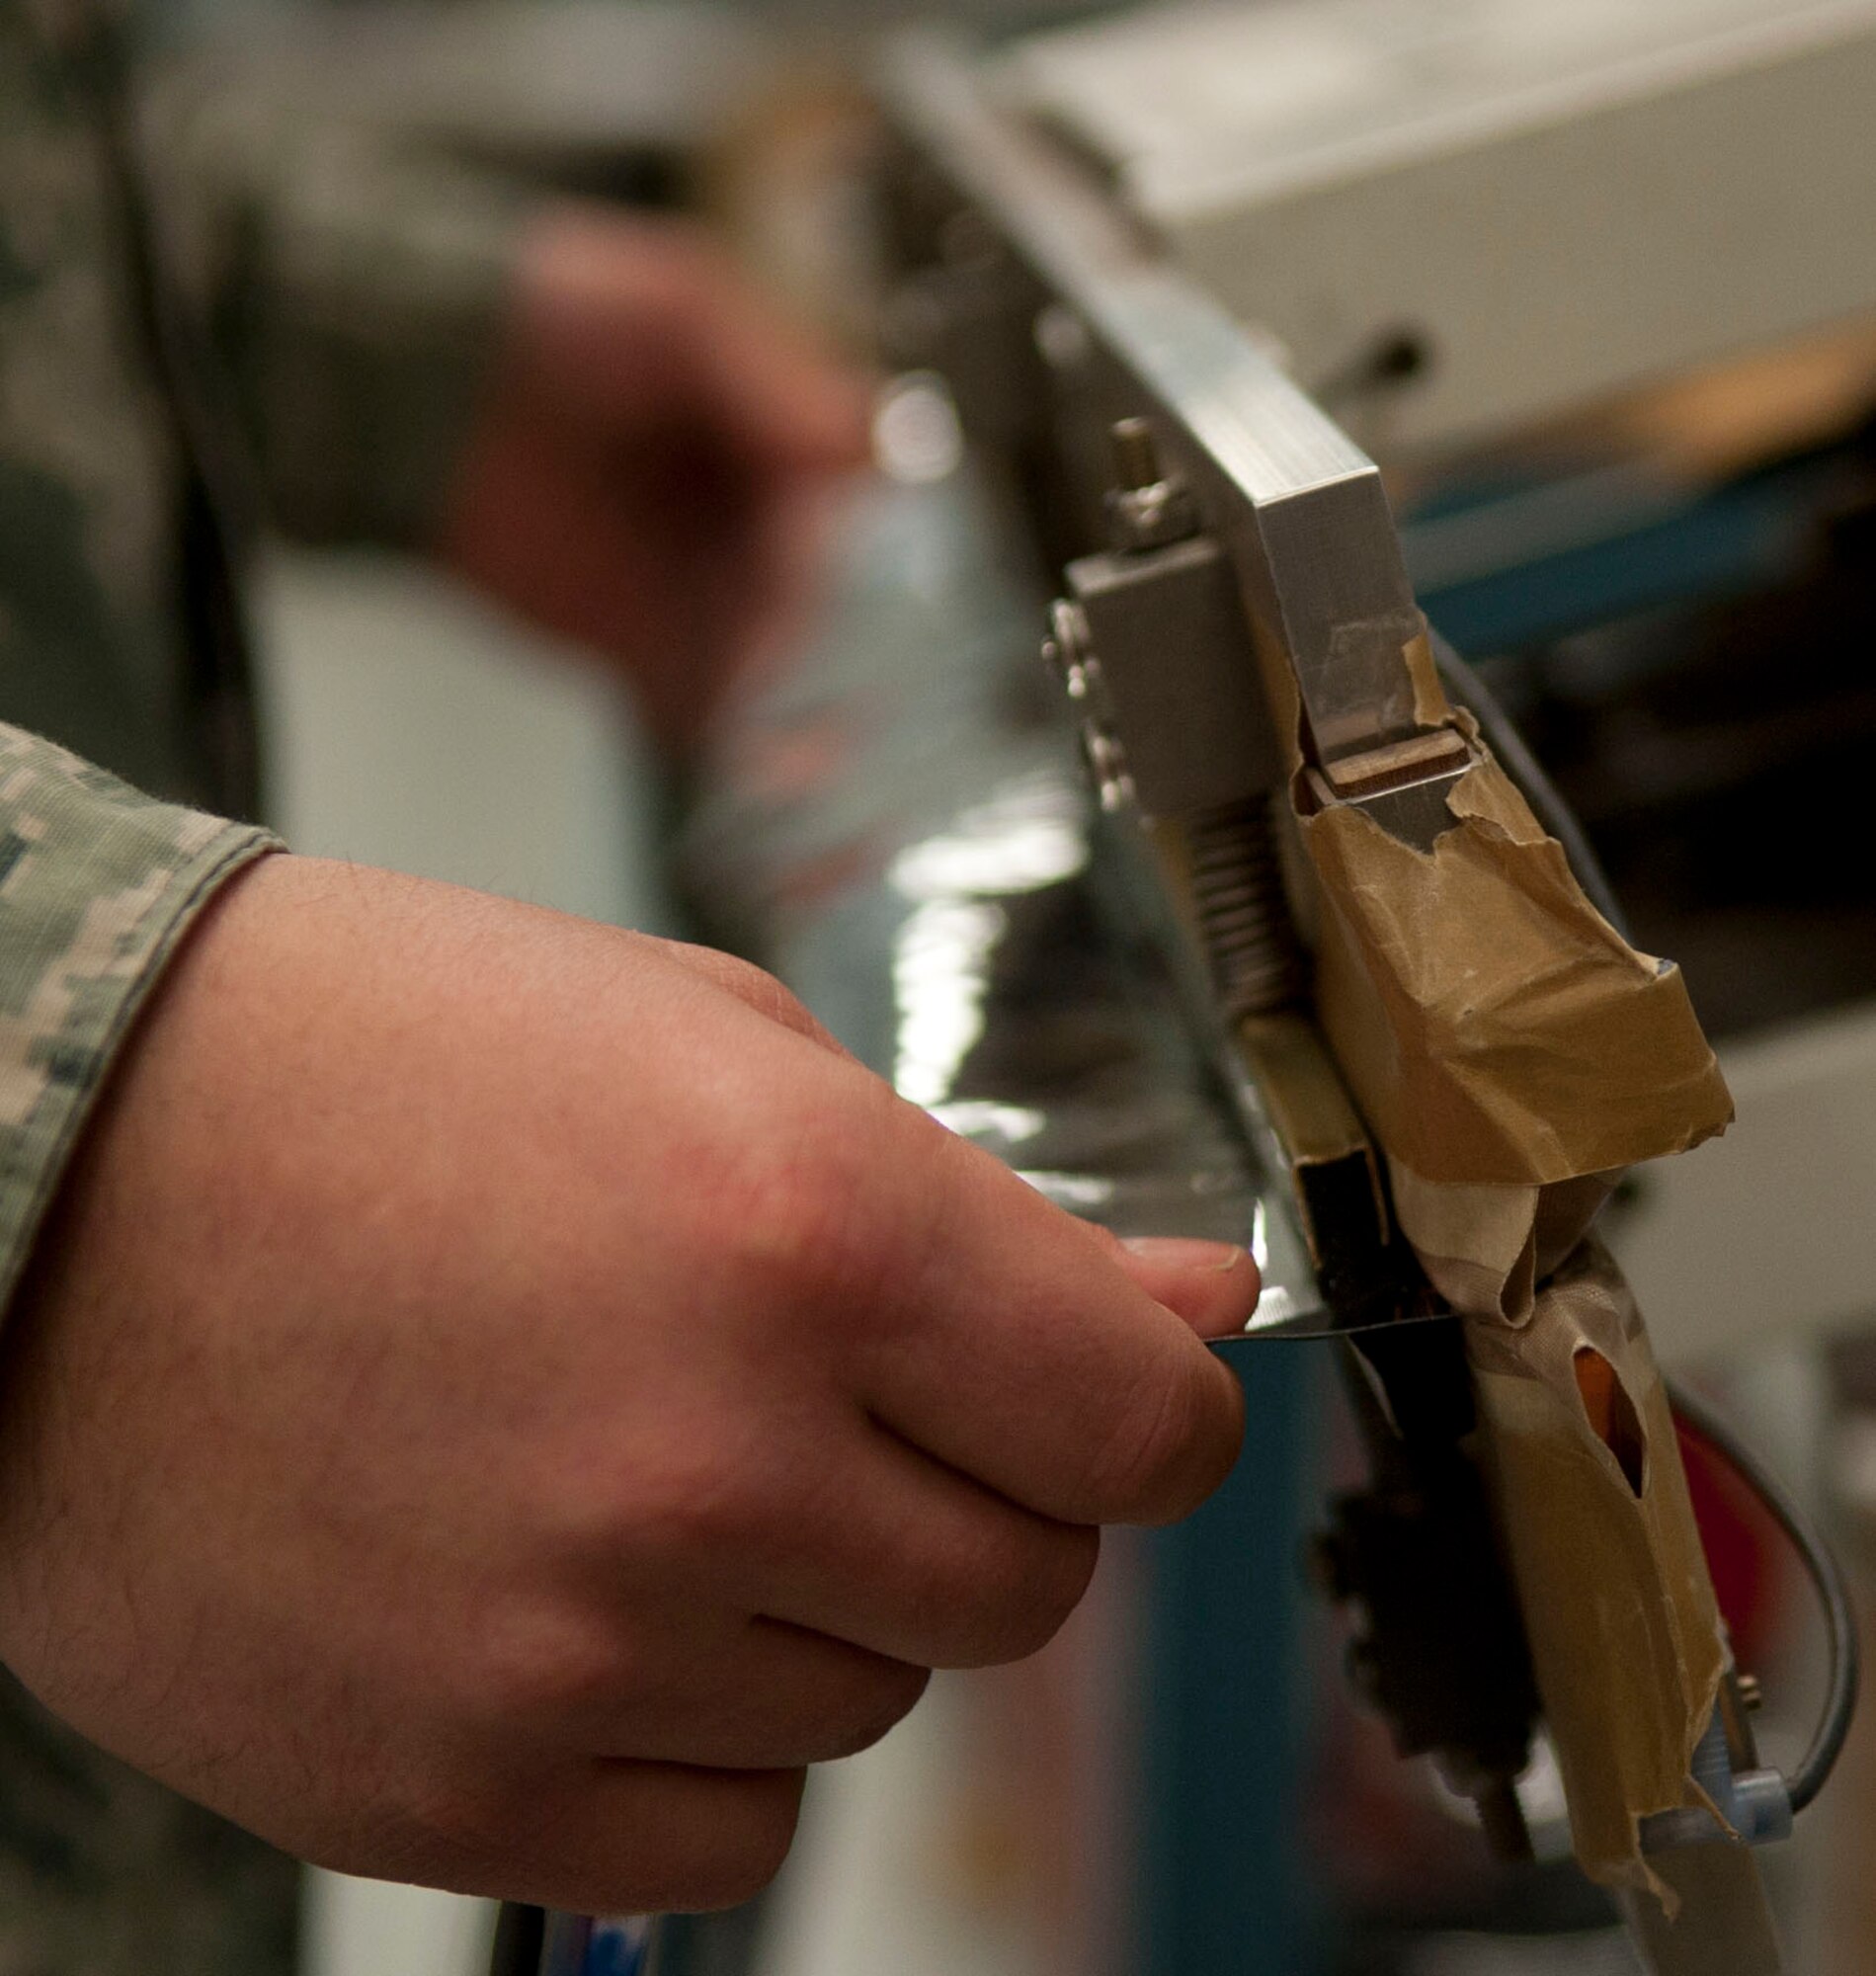 Senior Airman Peter Clark, 57th Maintenance Squadron munitions inspector, cuts material to make a heat sealing bag at the munitions inspection shop on Nellis Air Force Base, Nev., March 10,2015.  The barrier bag helps prevent static electricity.  (U.S. Air Force photo by Airman 1st Class Mikaley Towle)